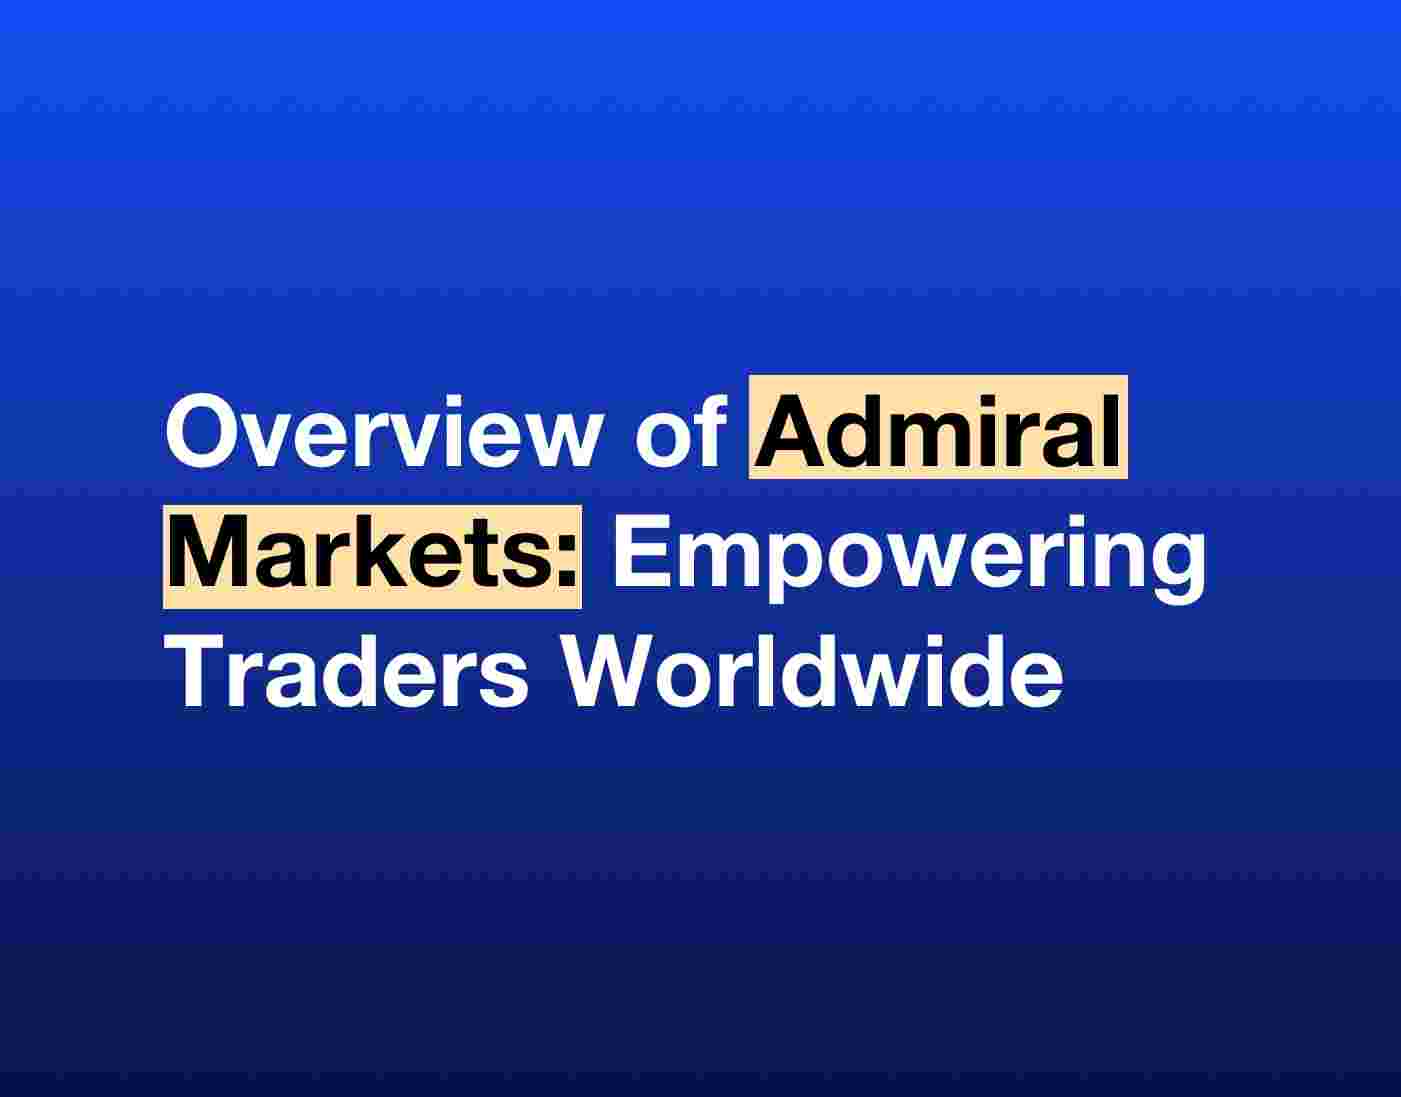 Overview of Admiral Markets: Empowering Traders Worldwide